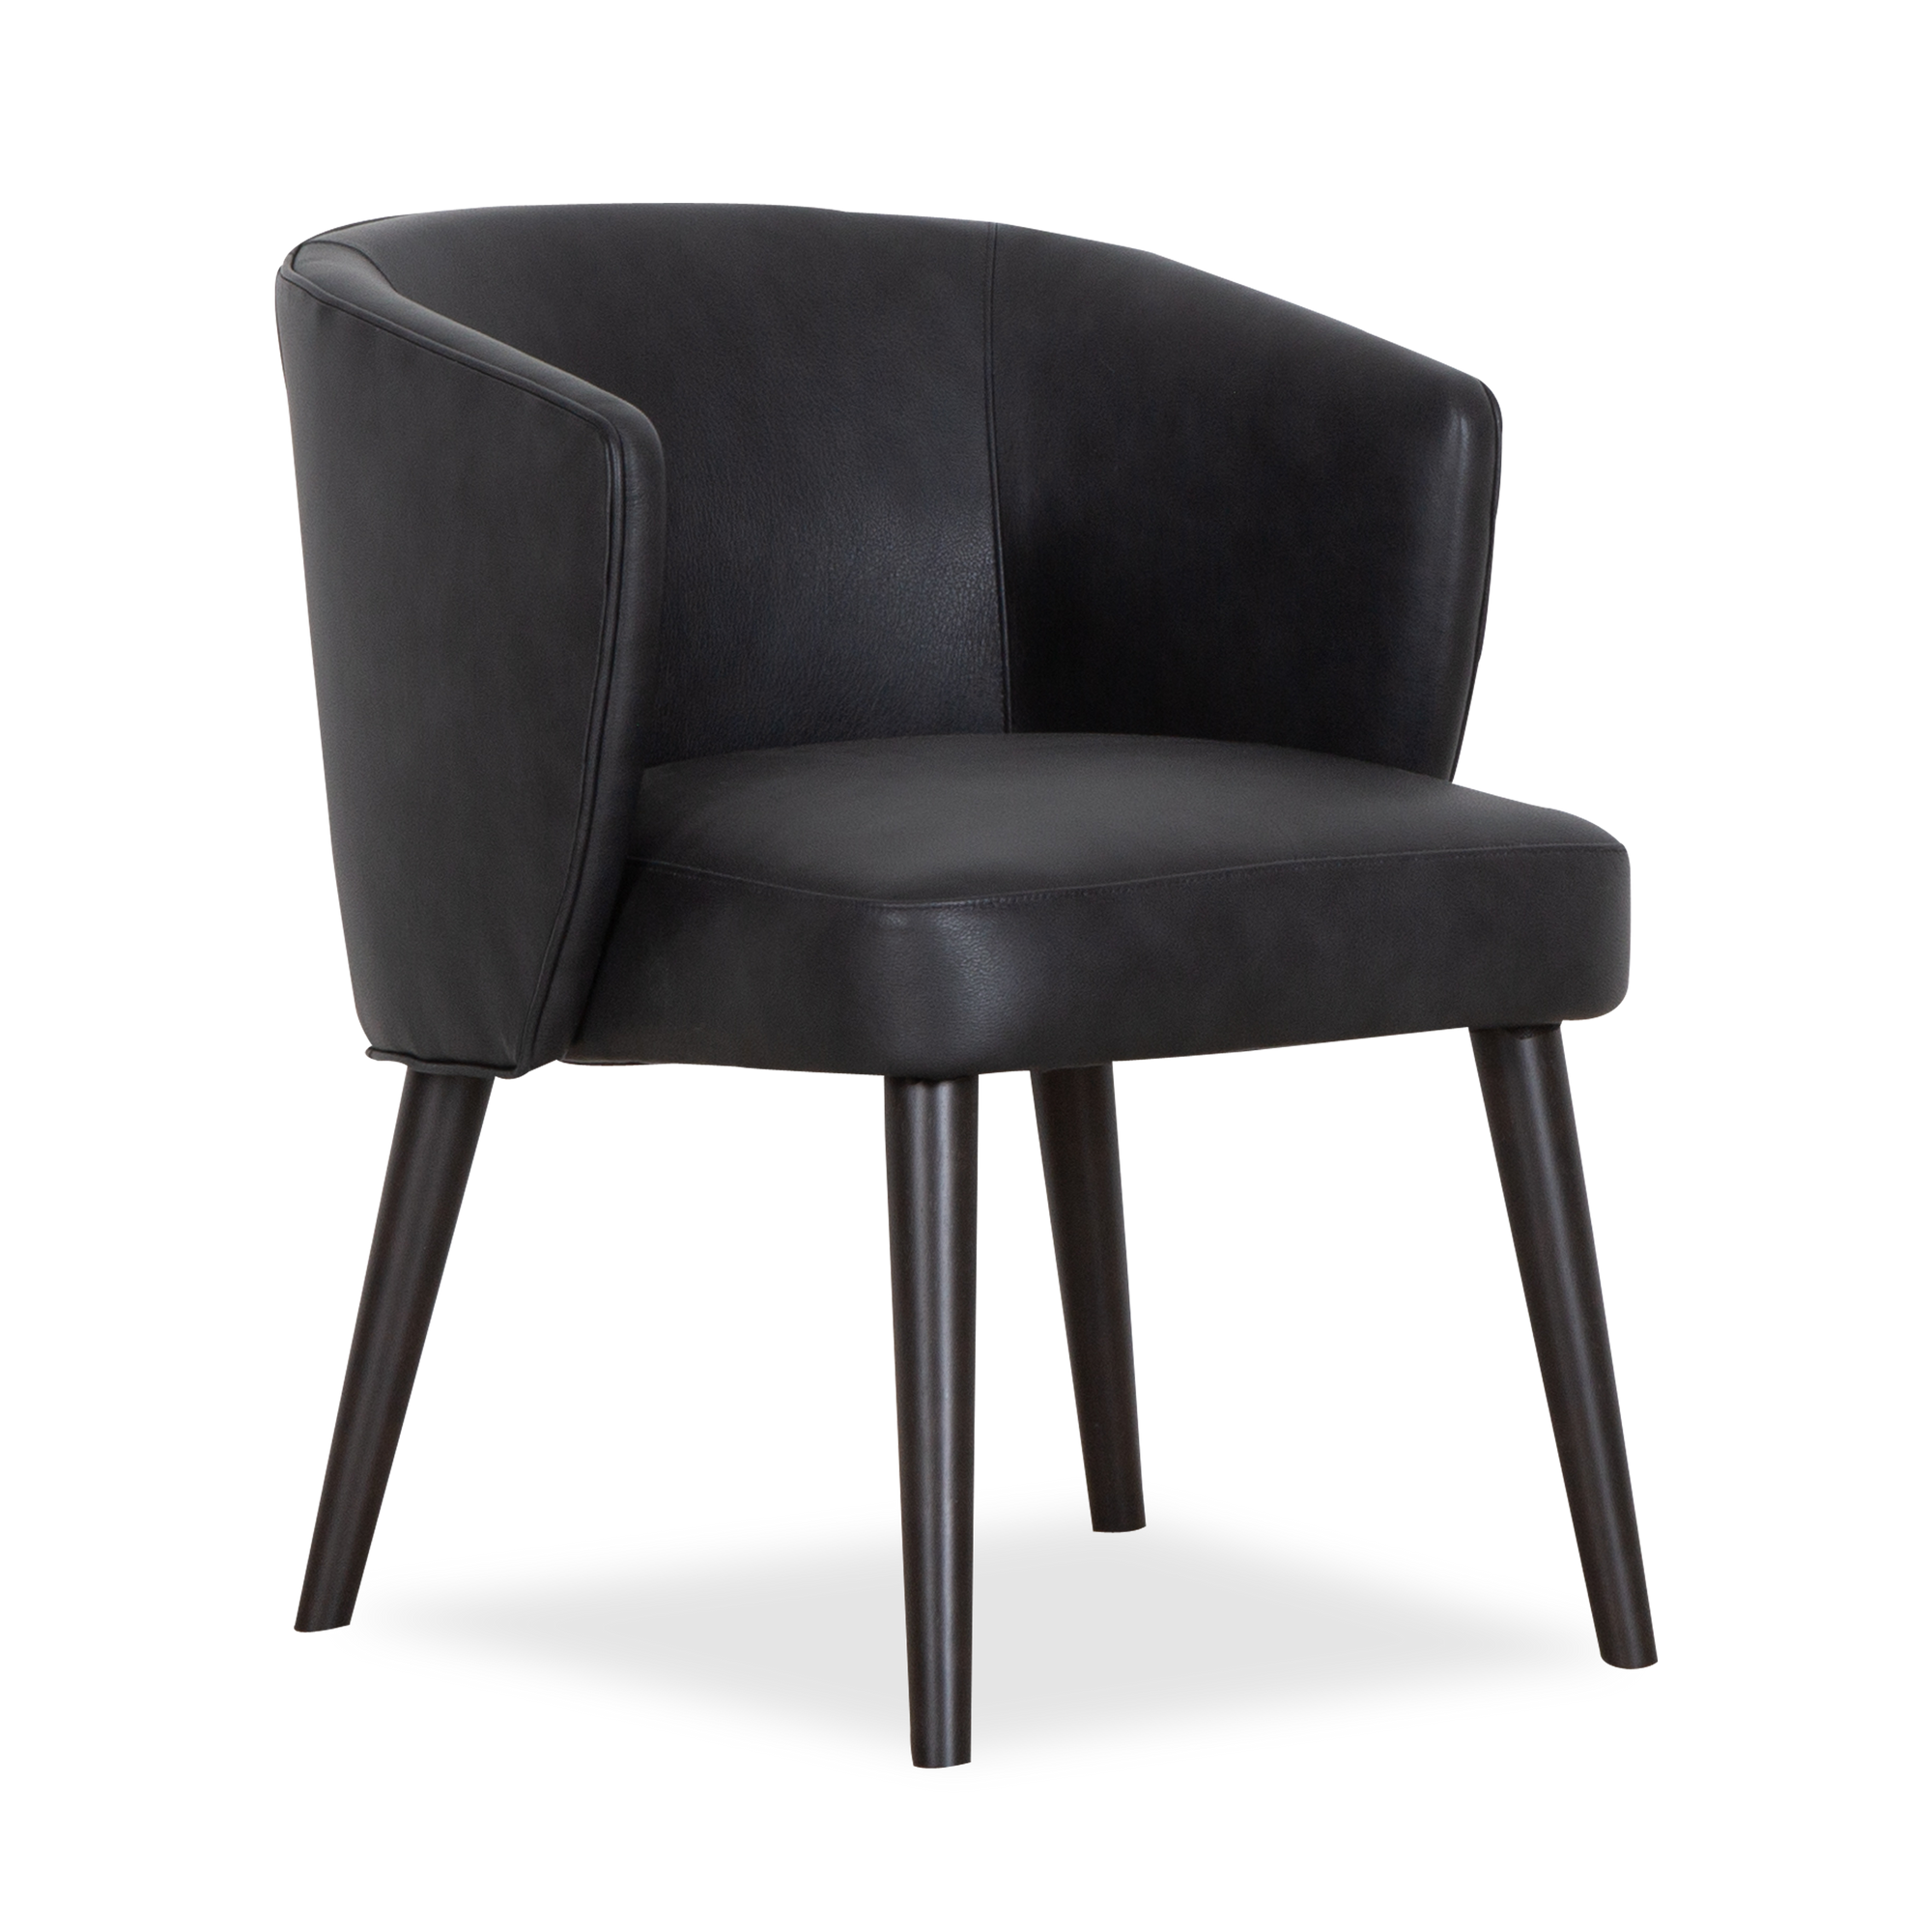 With a sheltered back and an accommodating seat, the Revolve dining chair brings style and comfort to your dining experience.